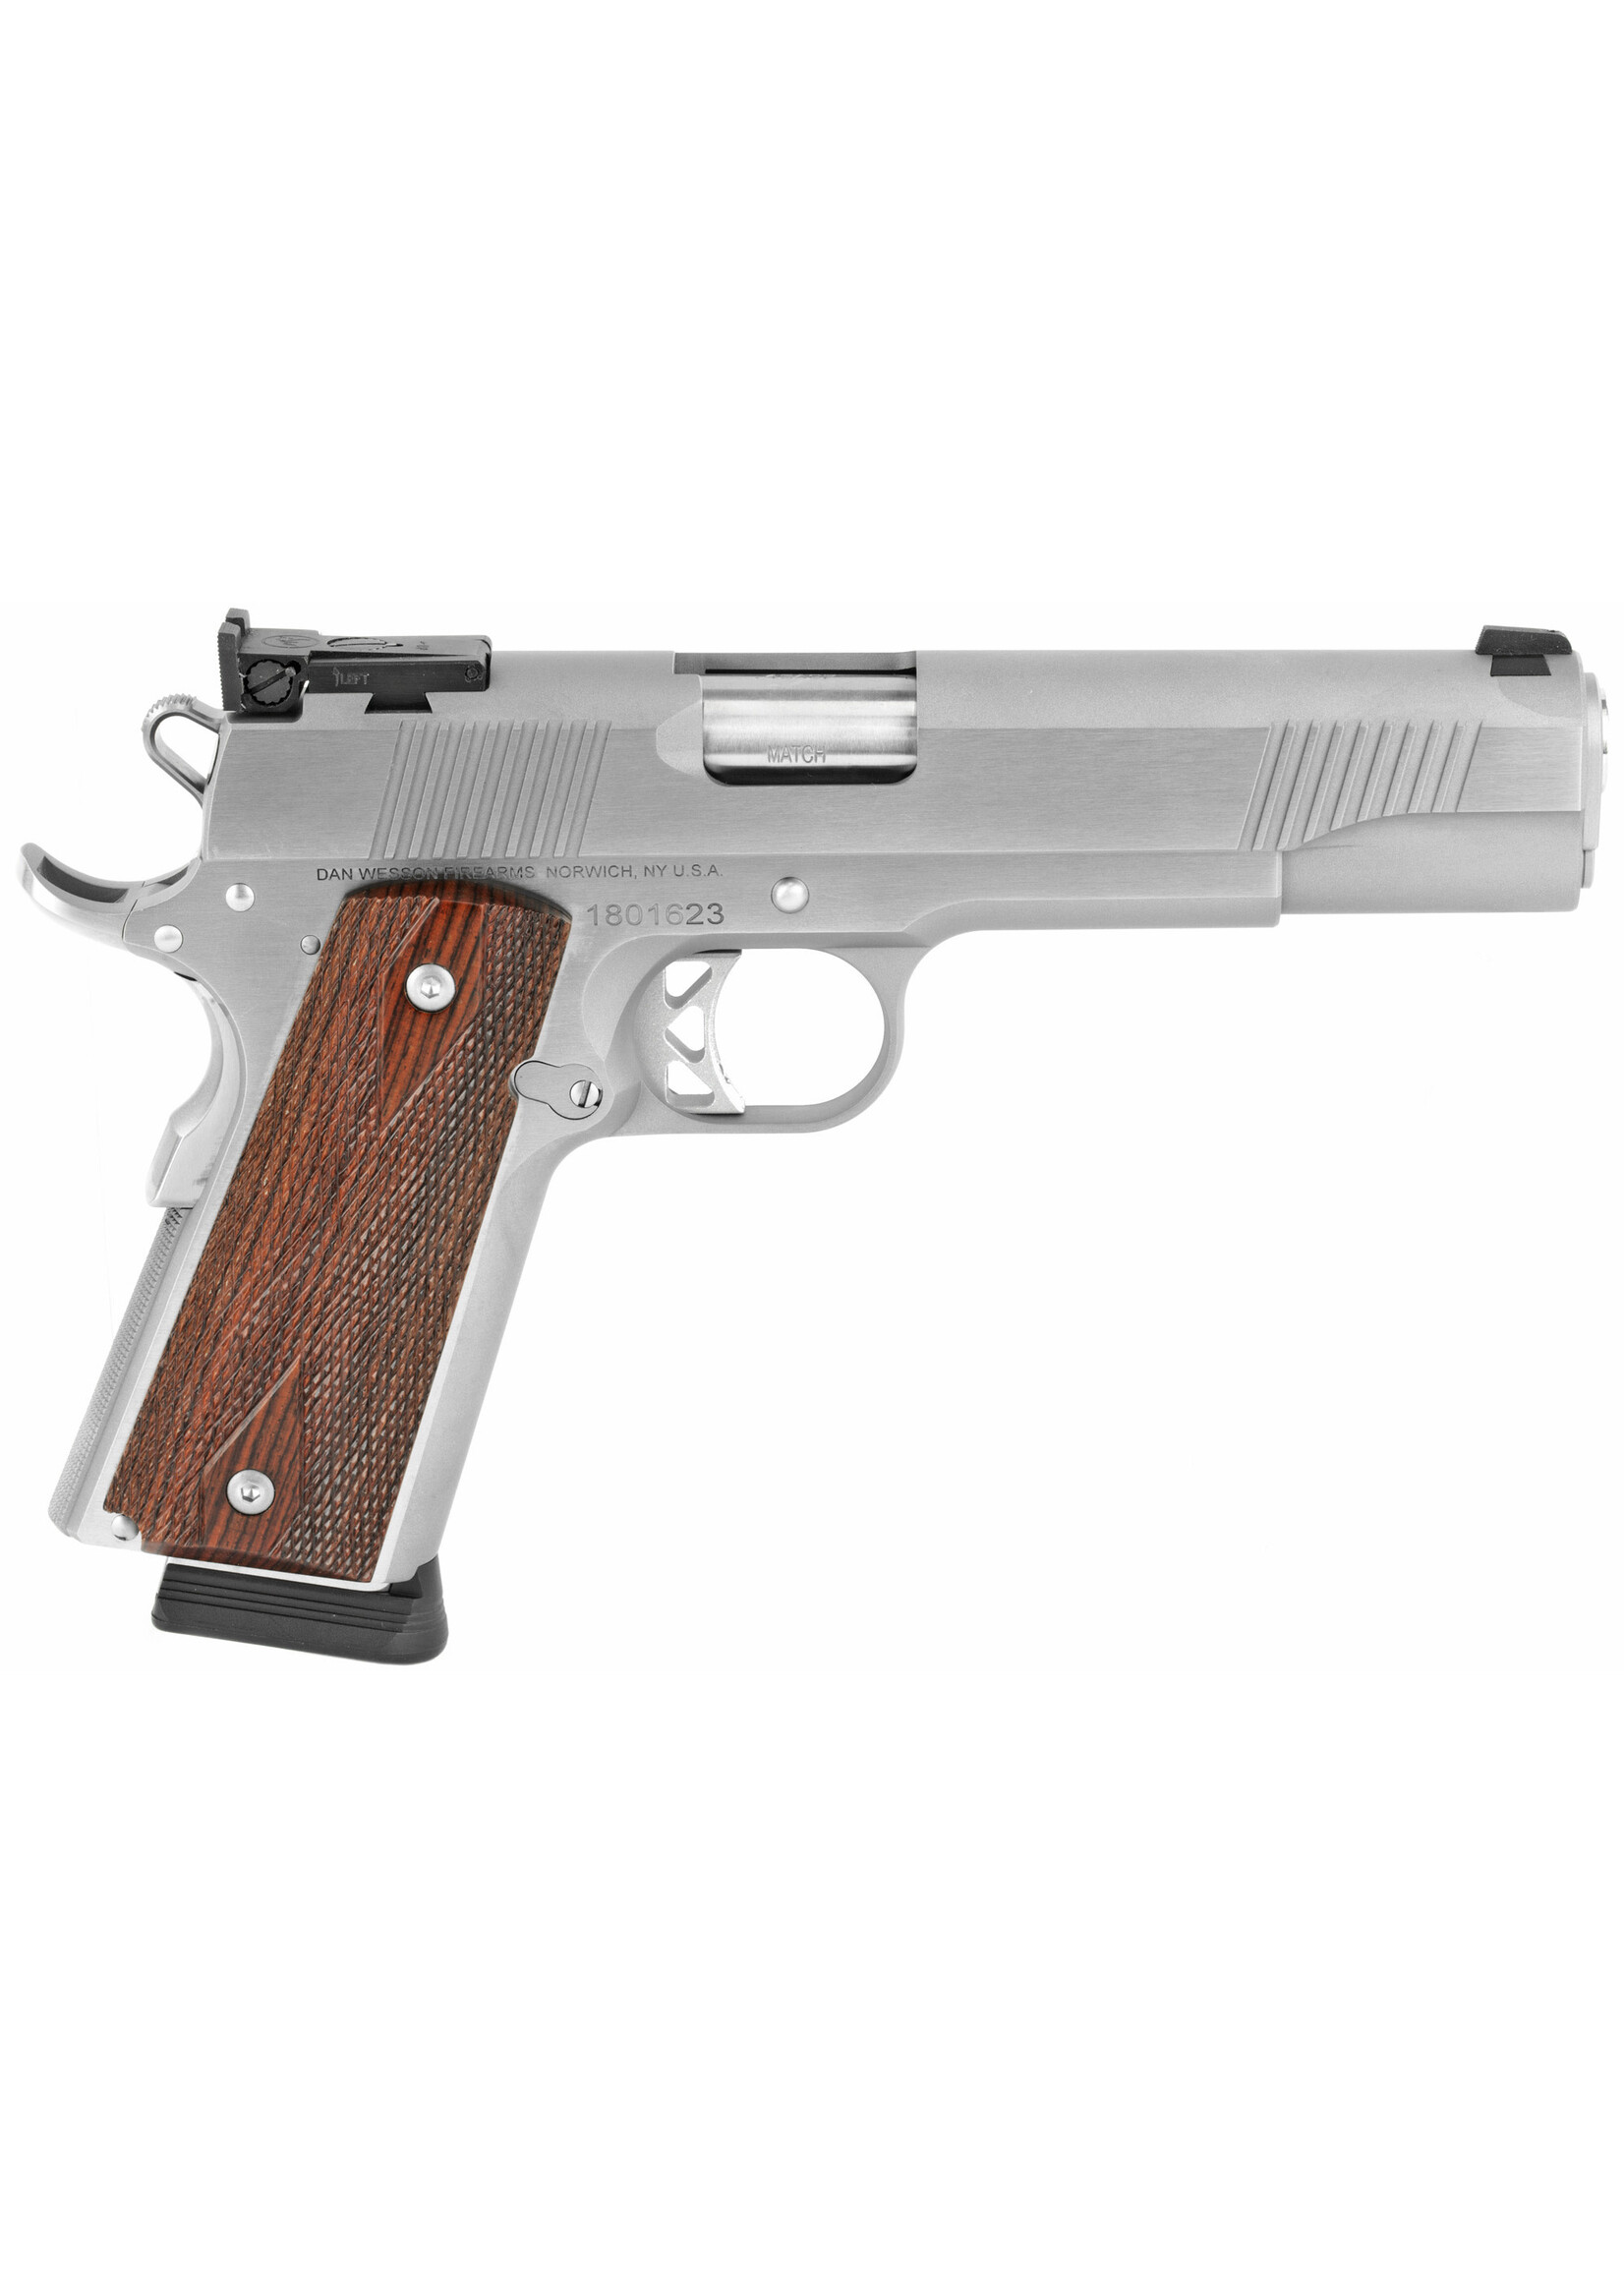 CZ USA / Dan Wesson Dan Wesson, Pointman Seven, Full Size, 45ACP, 5" Barrel, Steel Frame, Stainless Finish, Wood Grips, Adjustable Sights, 8Rd, 2 Magazines, CA Approved